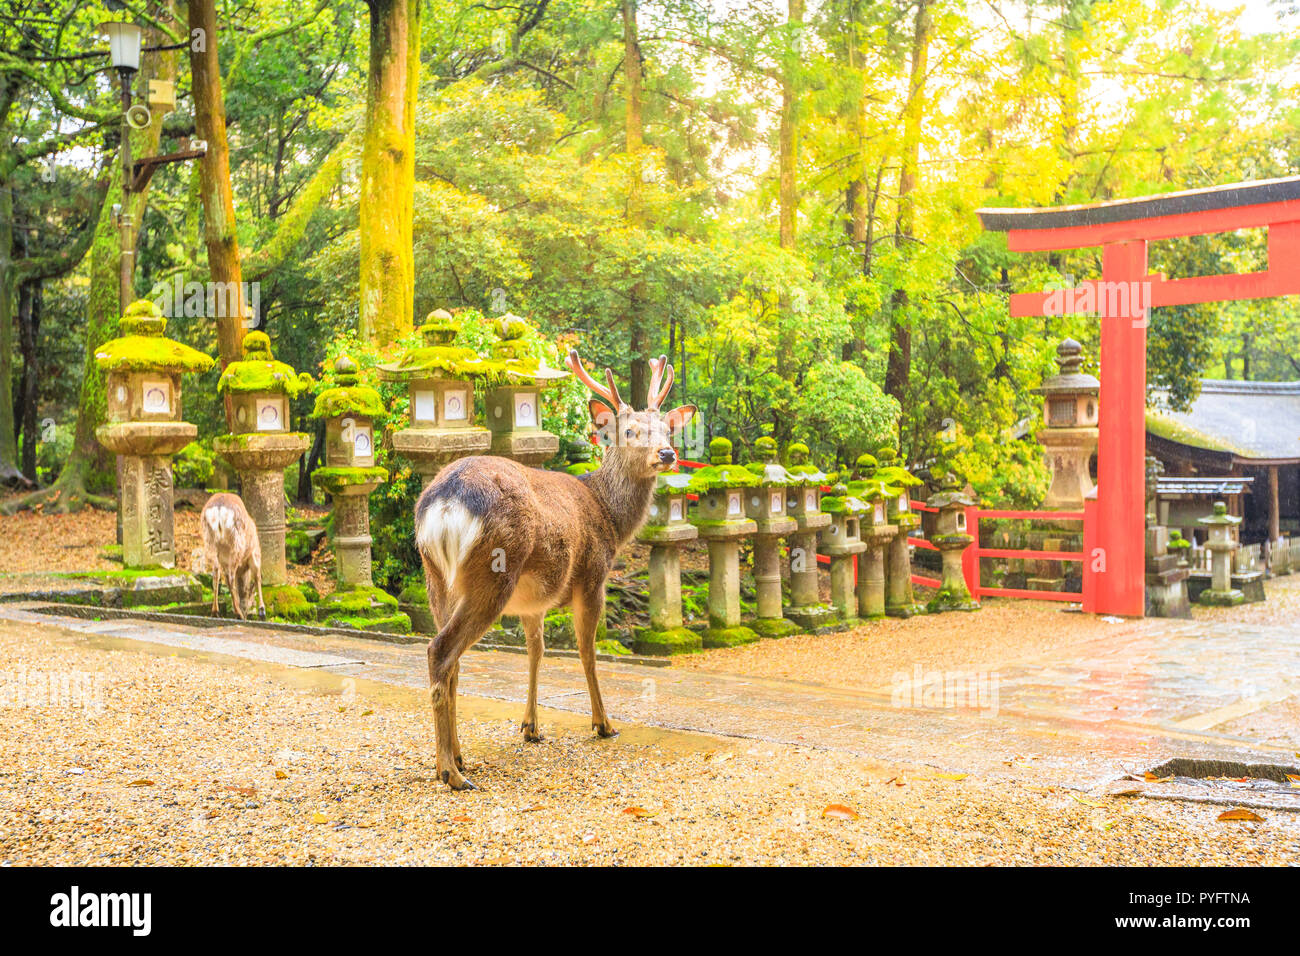 Wild deer in Nara Park in Japan. Deer are symbol of Nara's greatest tourist attraction. On background, red Torii gate of Kasuga Taisha Shine one of the most popular temples in Nara City. Stock Photo